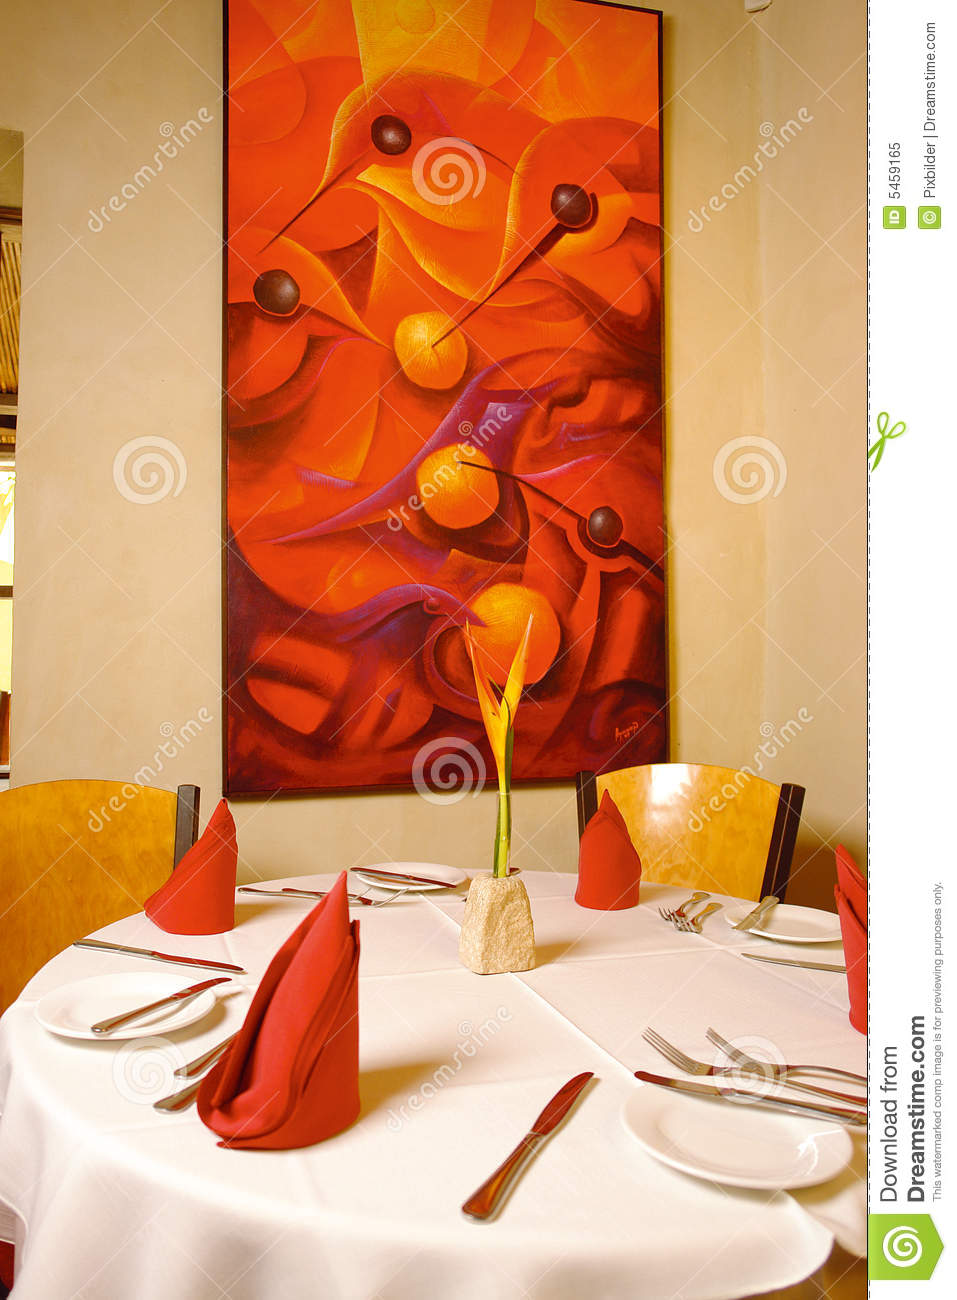 Table Royalty Free Stock Photo   Image  5459165